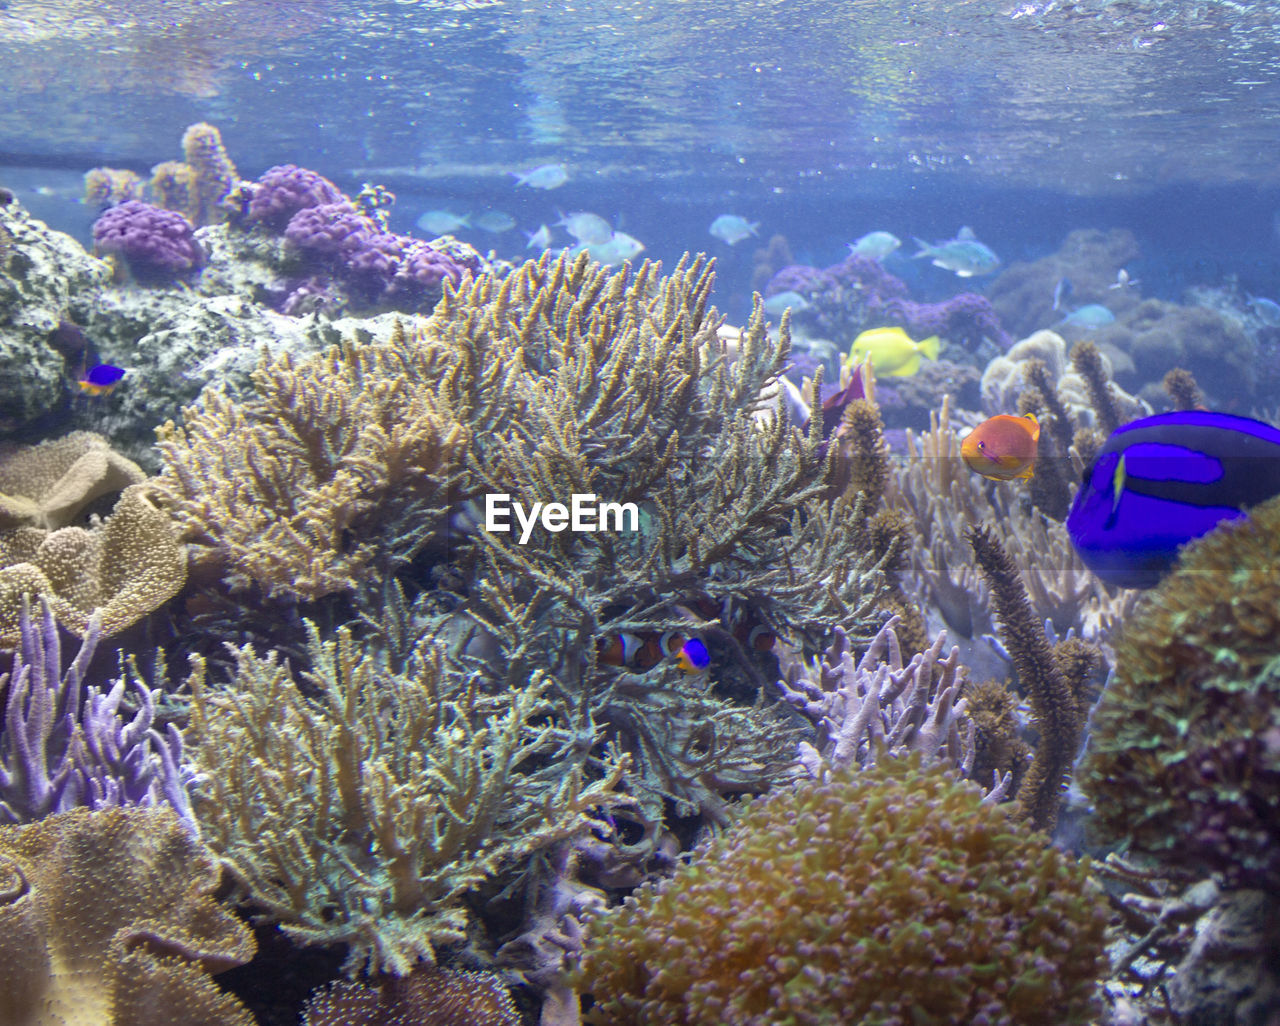 VIEW OF CORAL UNDERWATER